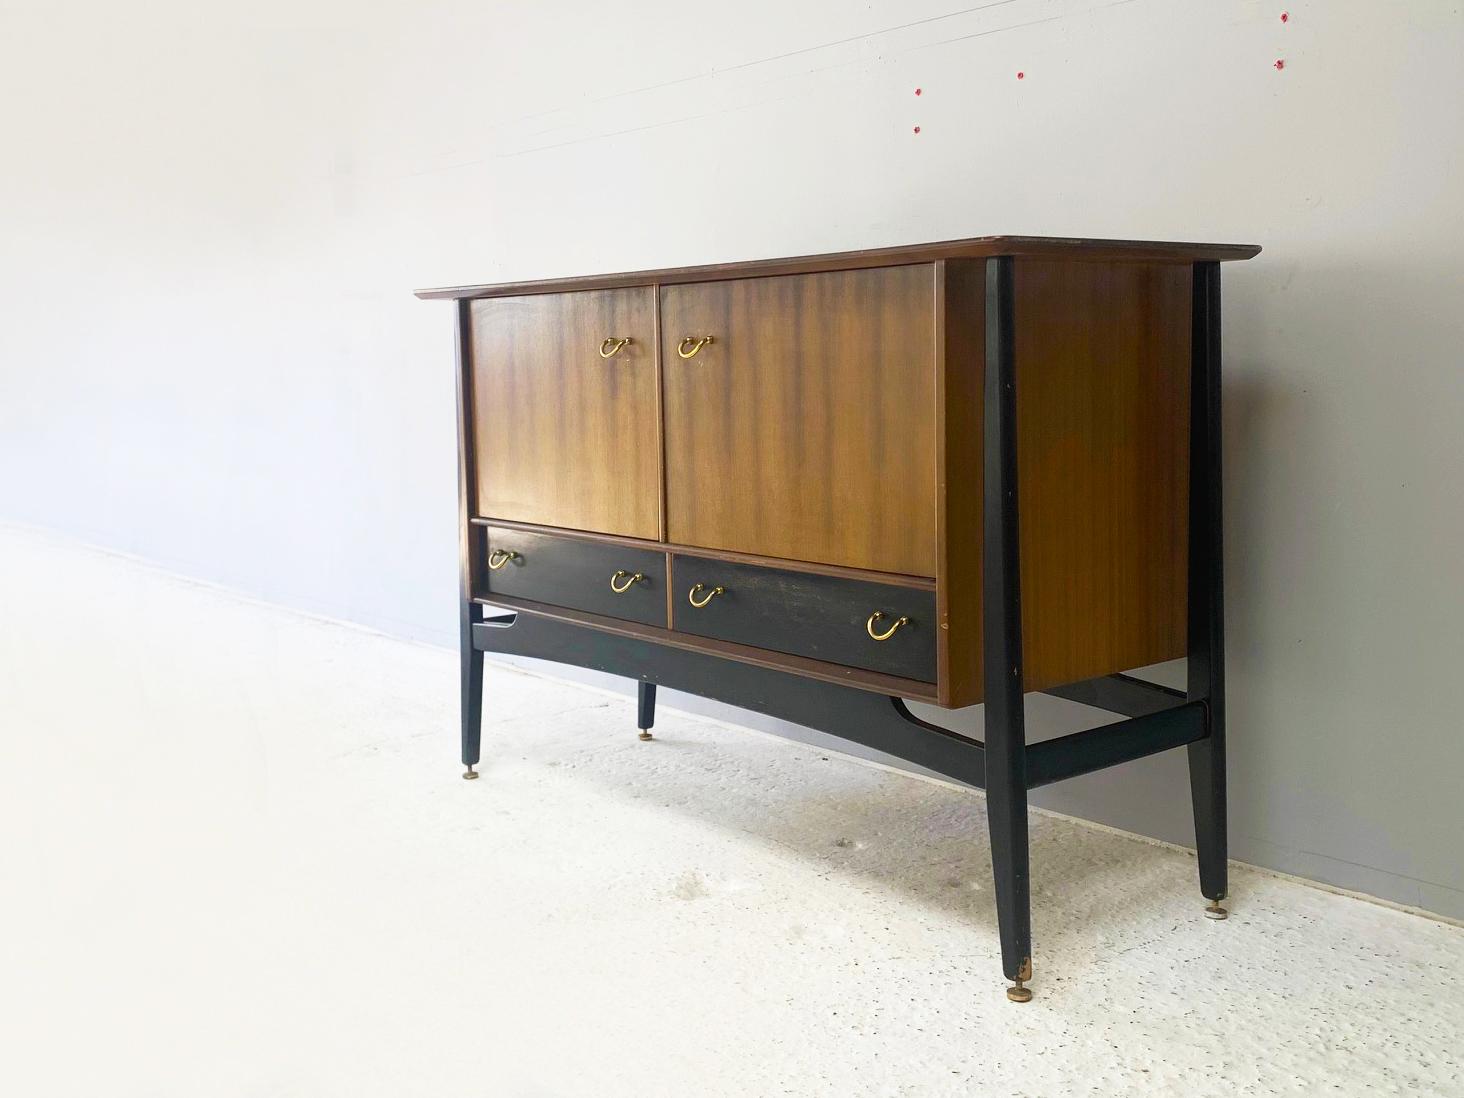 A G Plan Tola & Black sideboard produced in the late 1950’s

The G Plan Tola & black Librenza range preceded the company’s lean towards Danish design aesthetic in the 1960’s. 

’Tola’ is the name of the African mahogany used throughout the